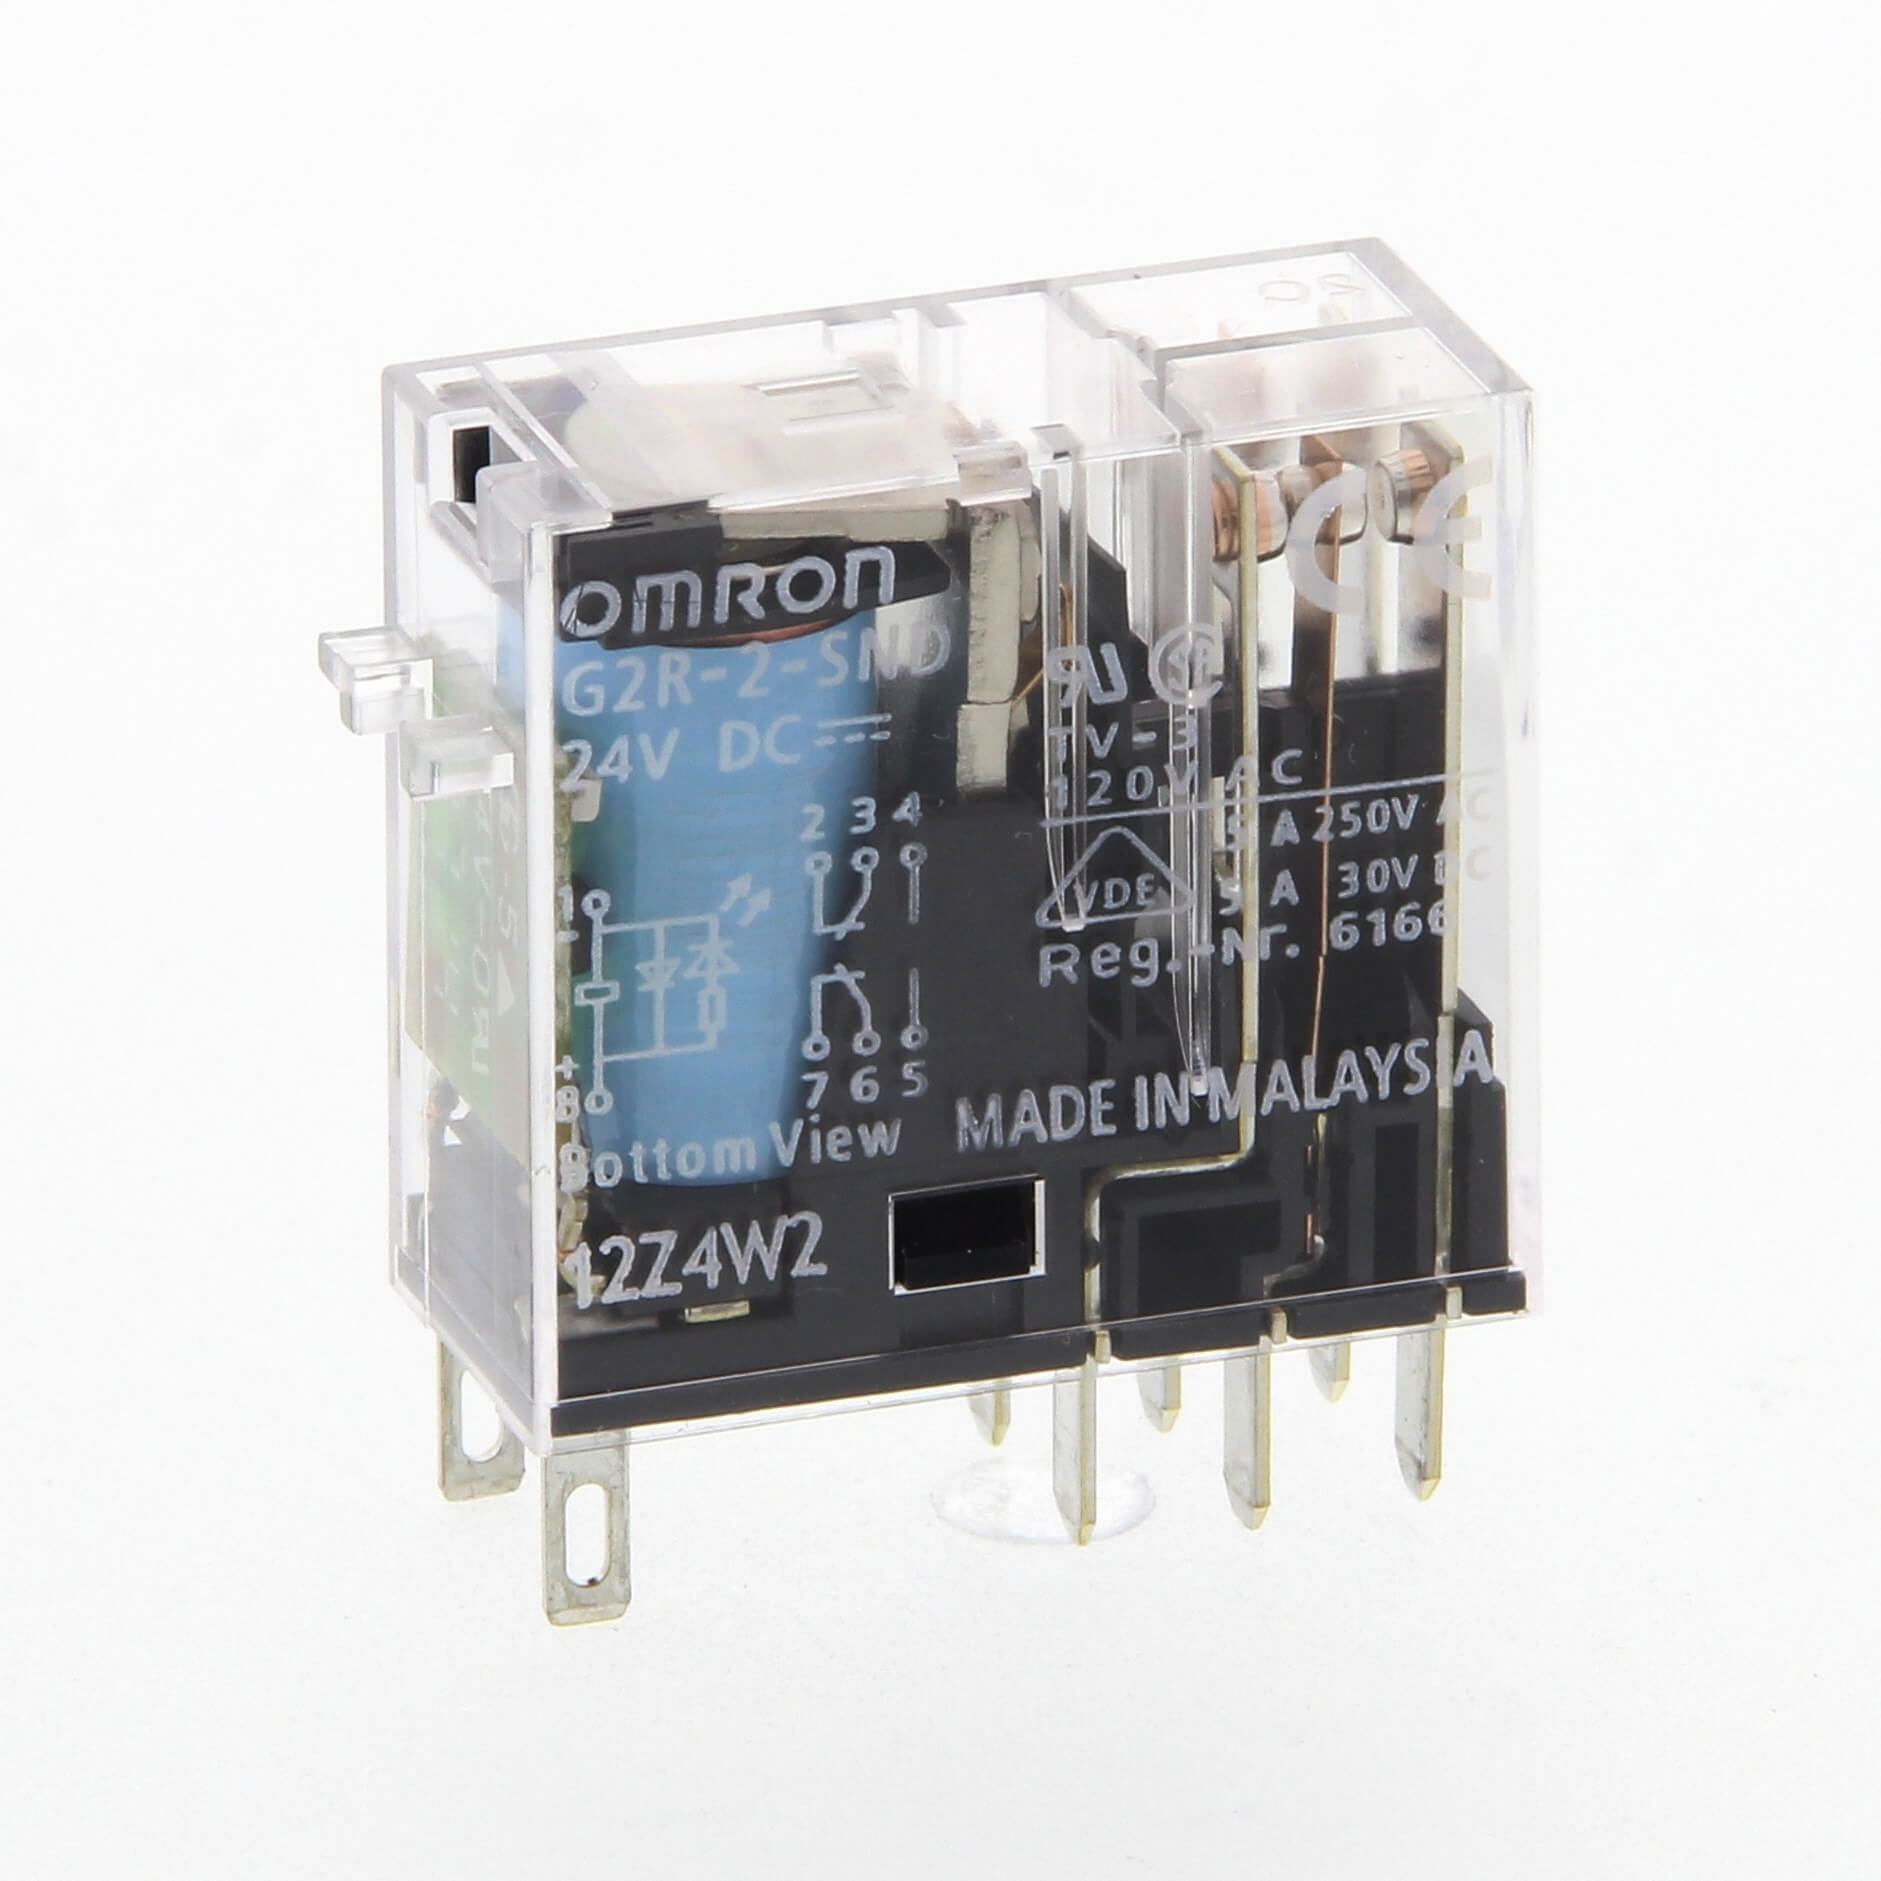 DC24V 5A Relay 8pins Omron G2R-2-SND S 